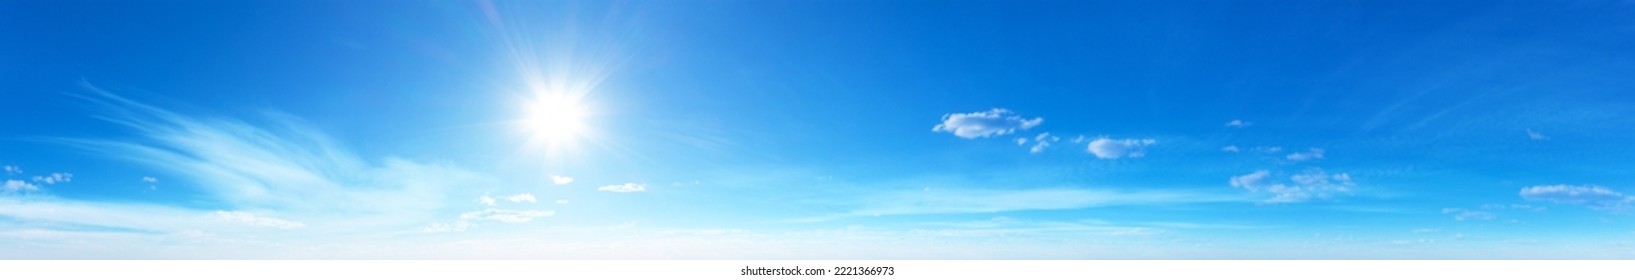 Panorama Blue sky and white clouds. Bfluffy cloud in the blue sky background - Shutterstock ID 2221366973